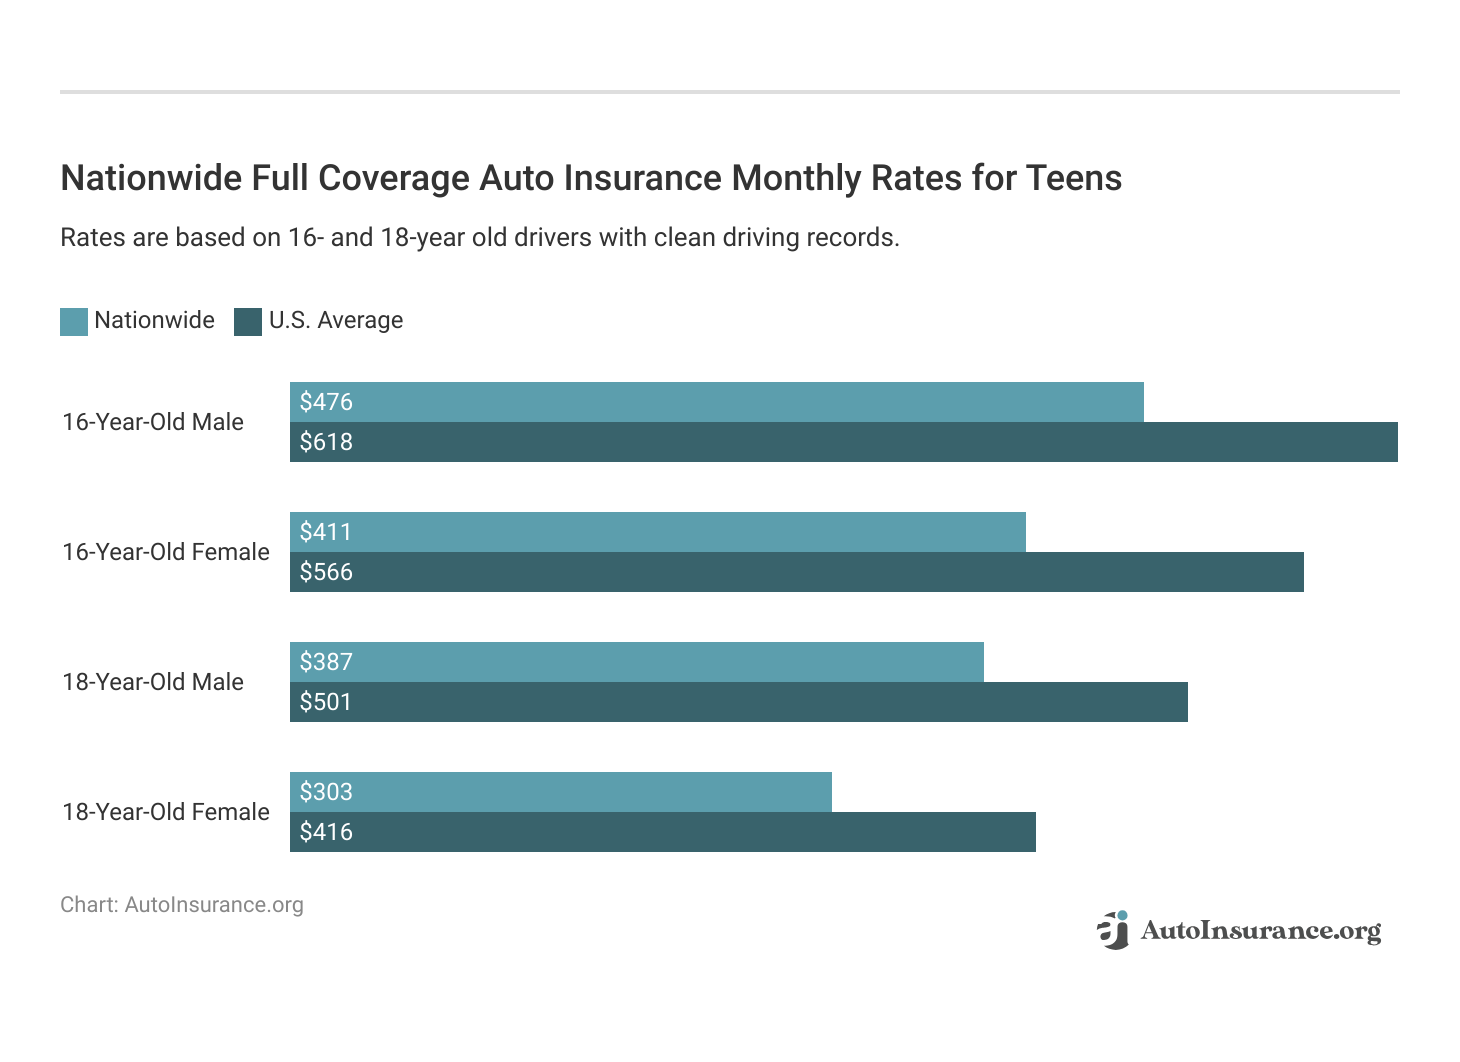 <h3>Nationwide Full Coverage Auto Insurance Monthly Rates for Teens</h3>